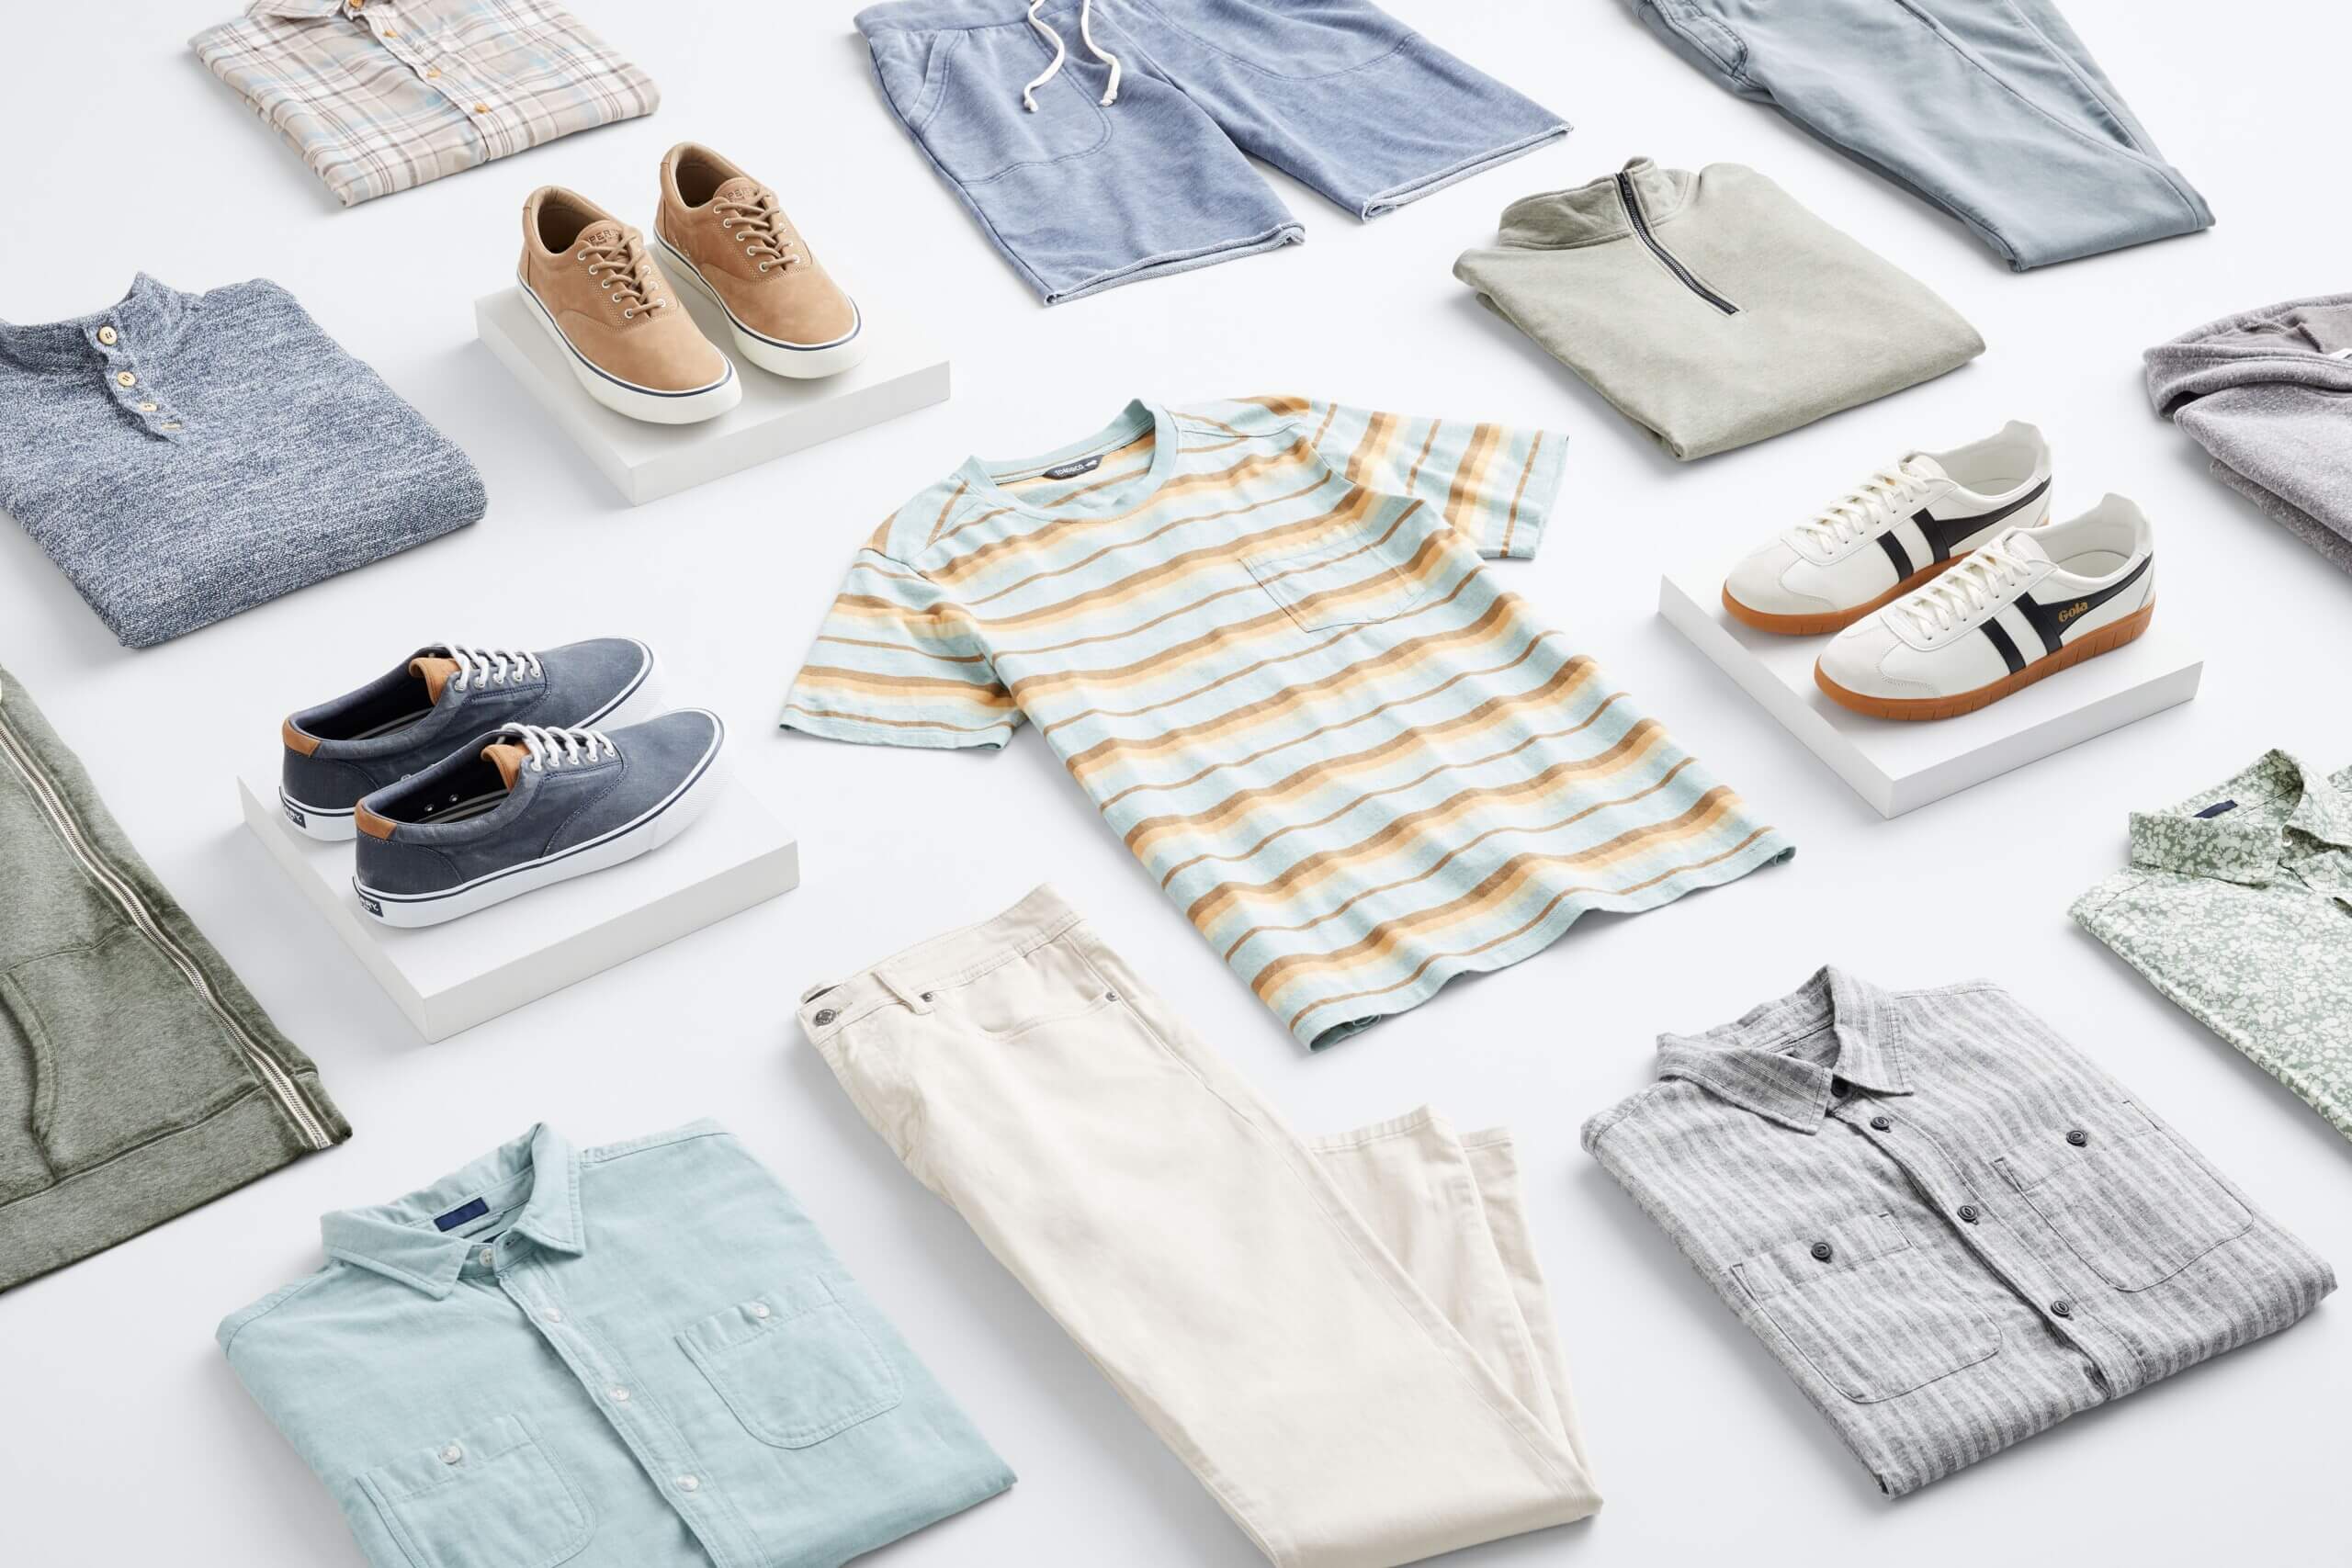 Stitch Fix men's laydown featuring blue shorts, light jeans, khaki jeans, various light blue shirts in henley and button-down styles, sneakers in white, blue and tan. 